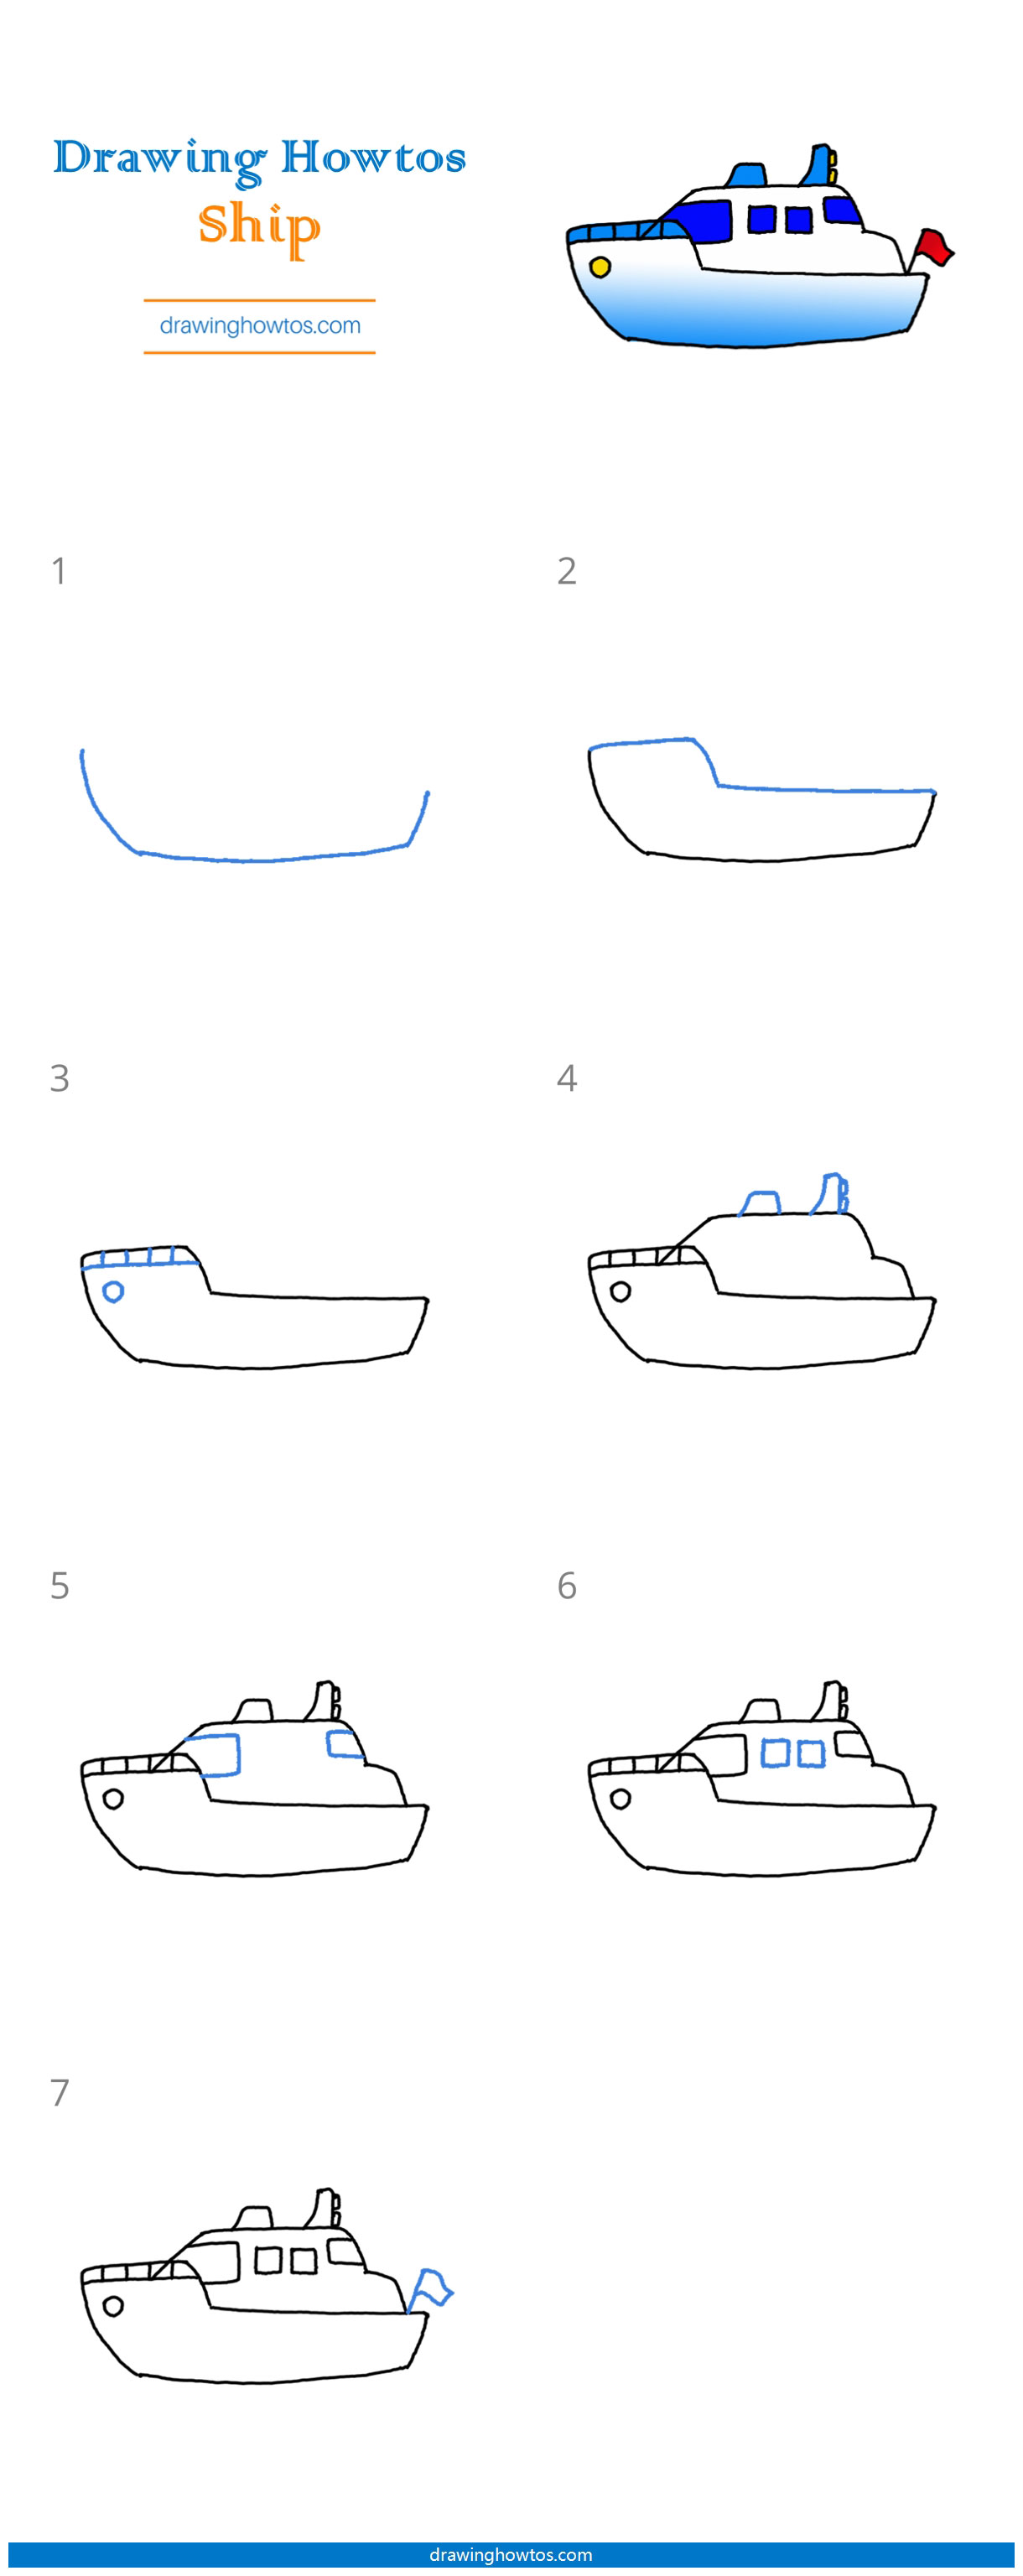 How to Draw a Ship Step by Step